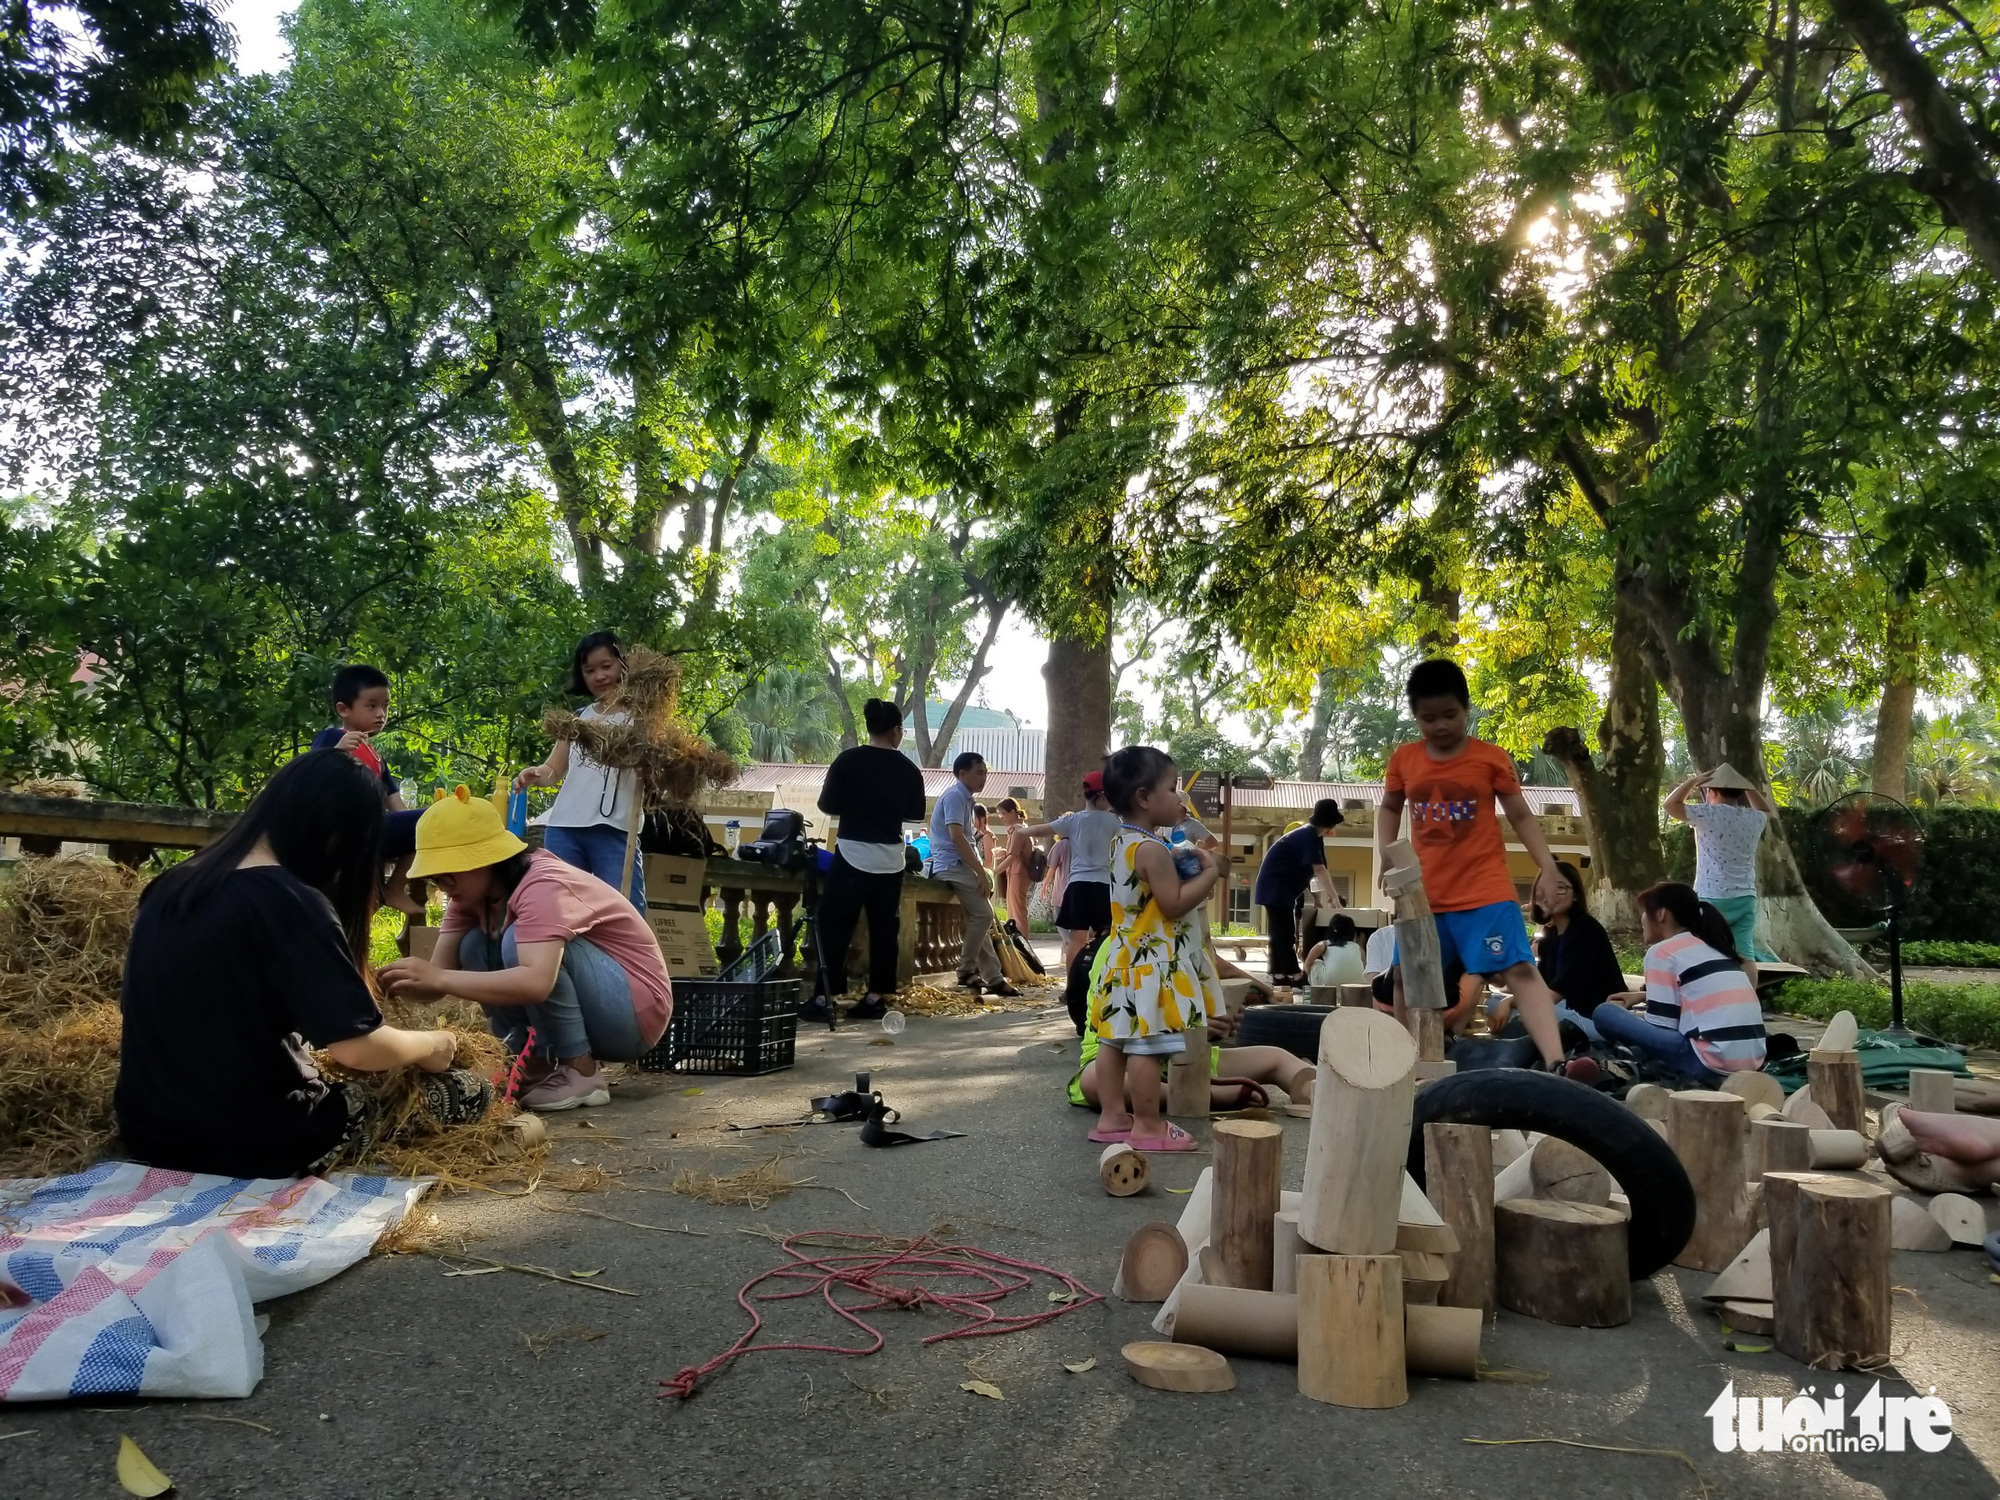 Children play with straws, wooden blocks and old tires on the ground at the ‘Kingdom of Recycled Materials’ event in Hanoi, Vietnam, May 31, 2020. Photo: Ha Thanh / Tuoi Tre